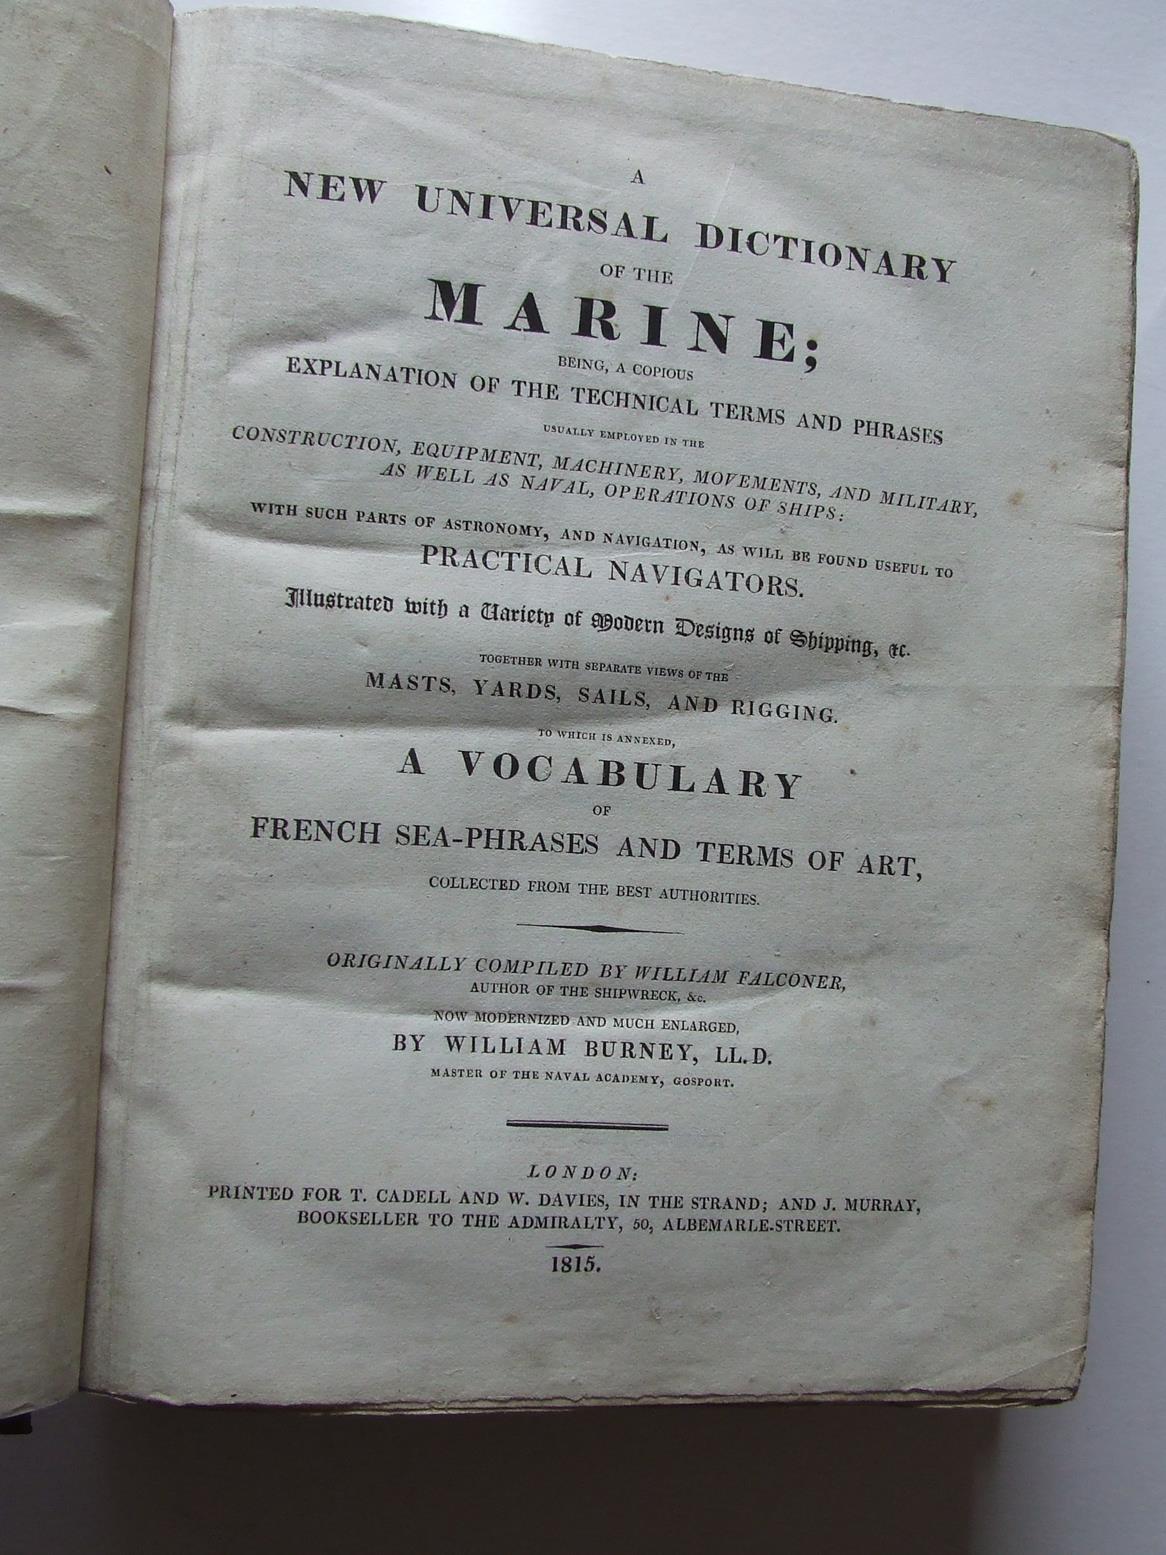 A New Universal Dictionary of the Marine